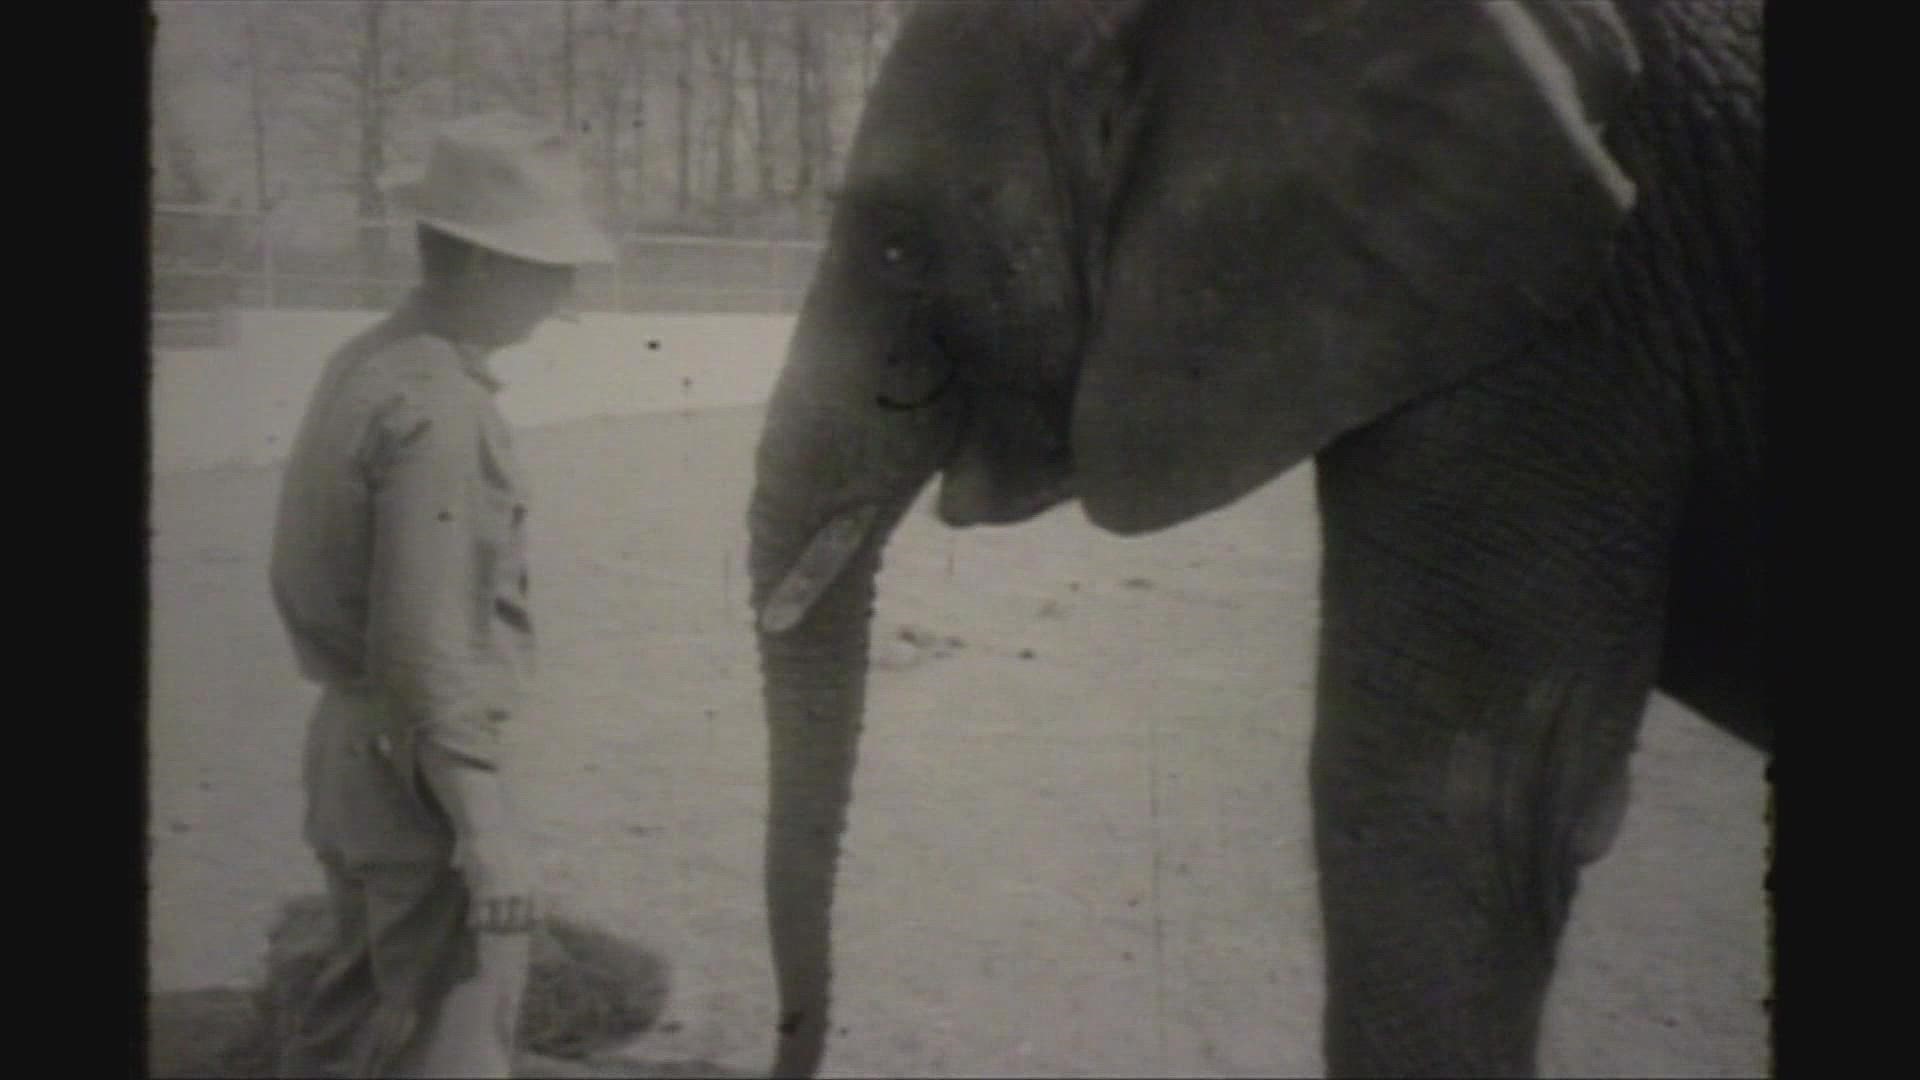 Elephants track a long history in Knoxville dating back to the late 1800s and early 1900s.